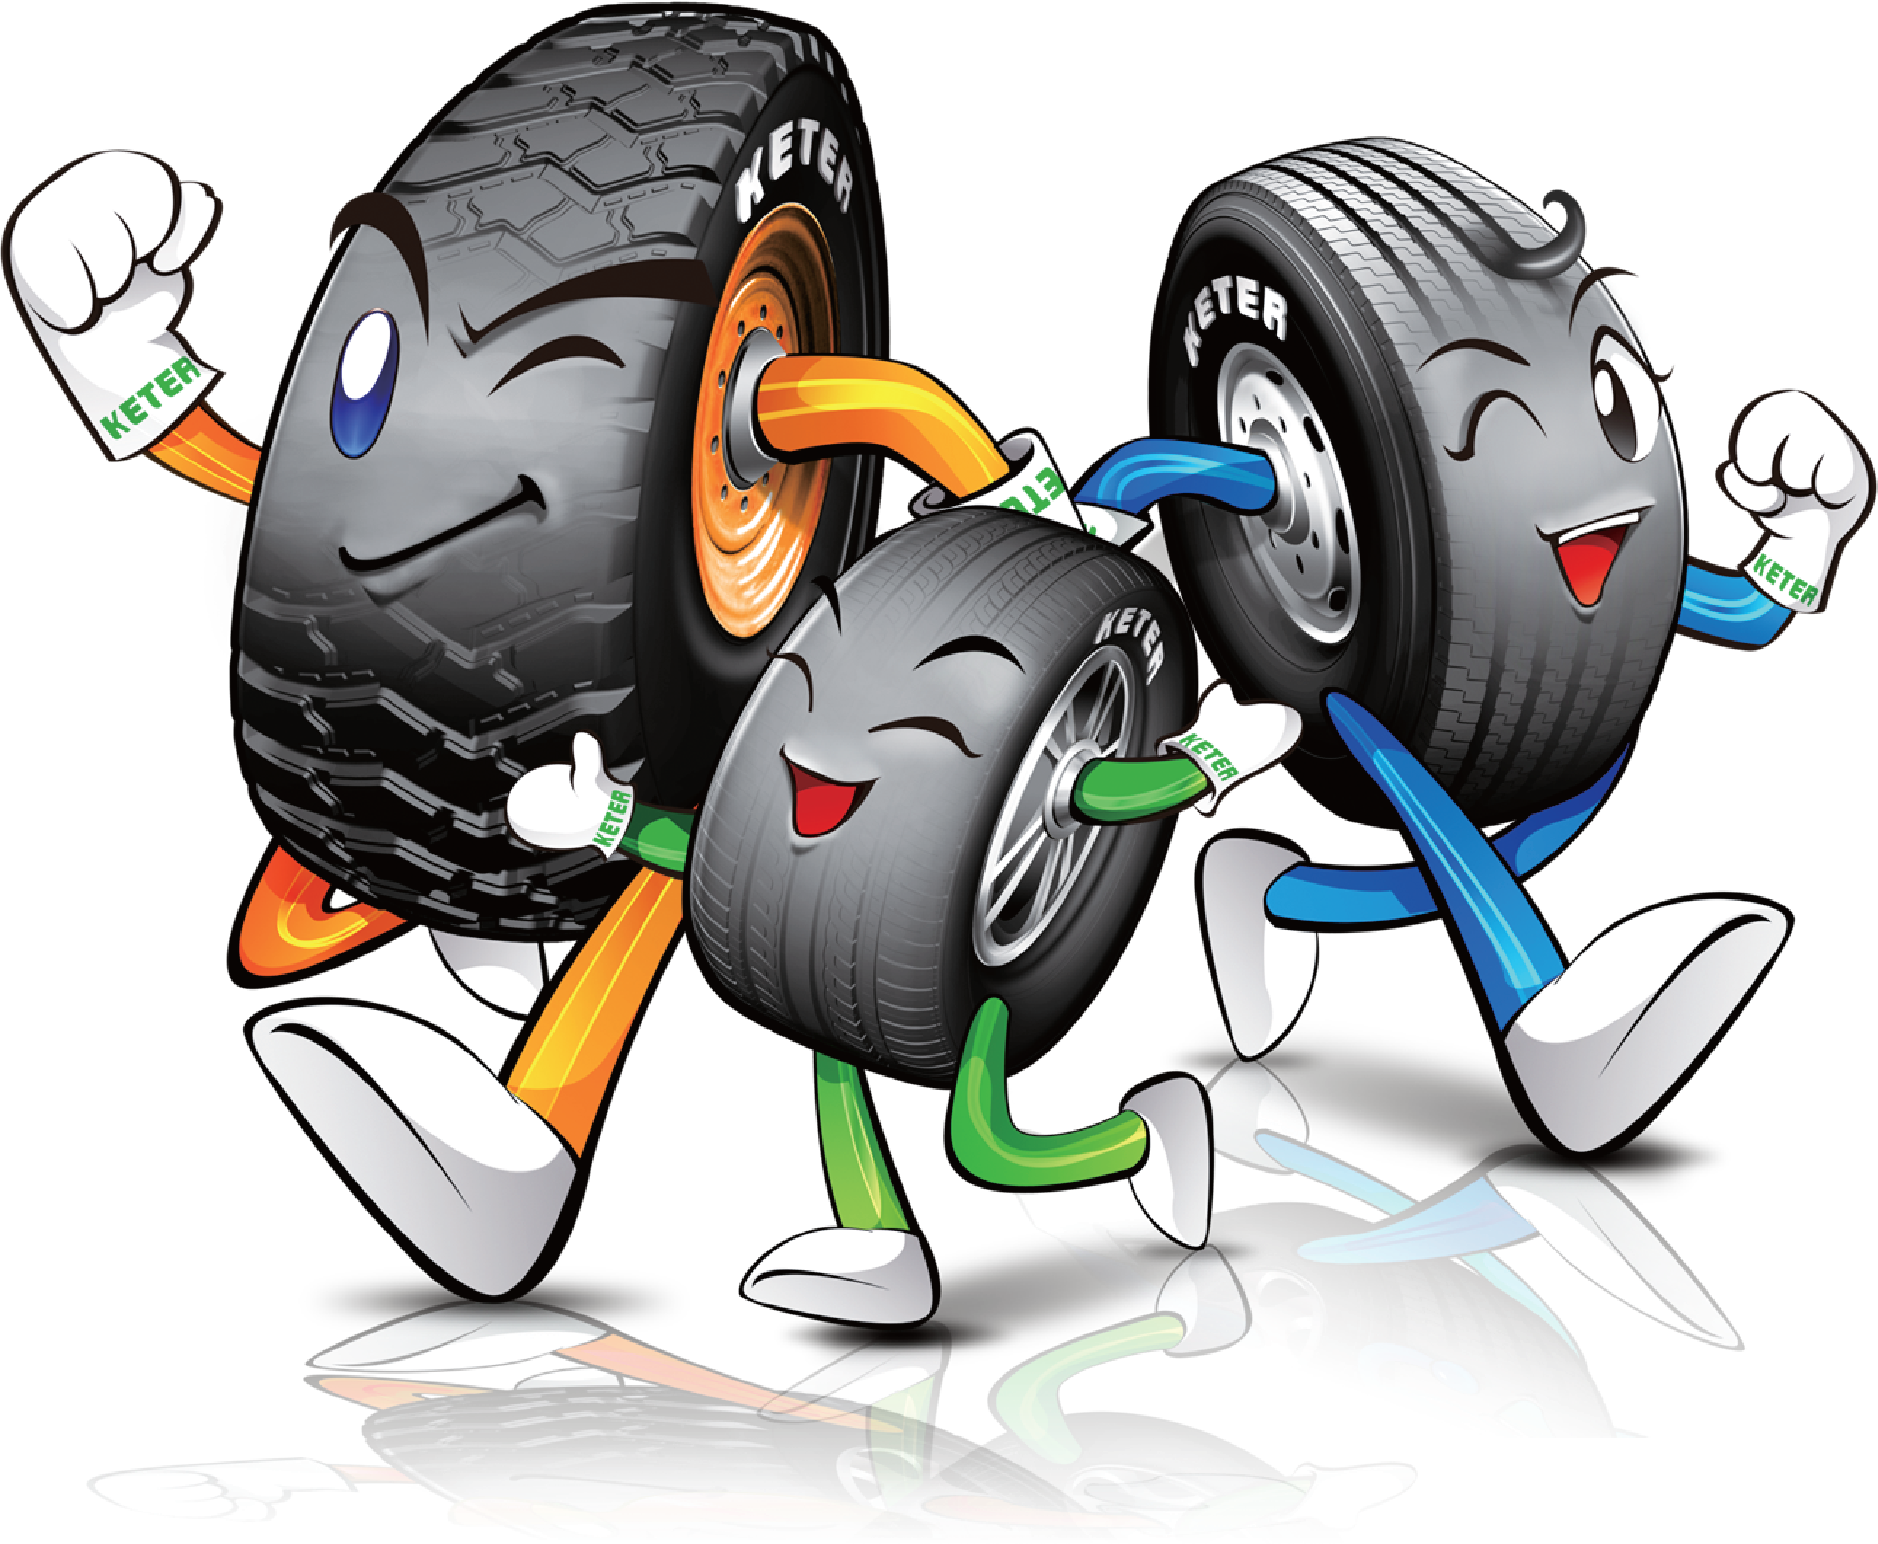 Keter tyres